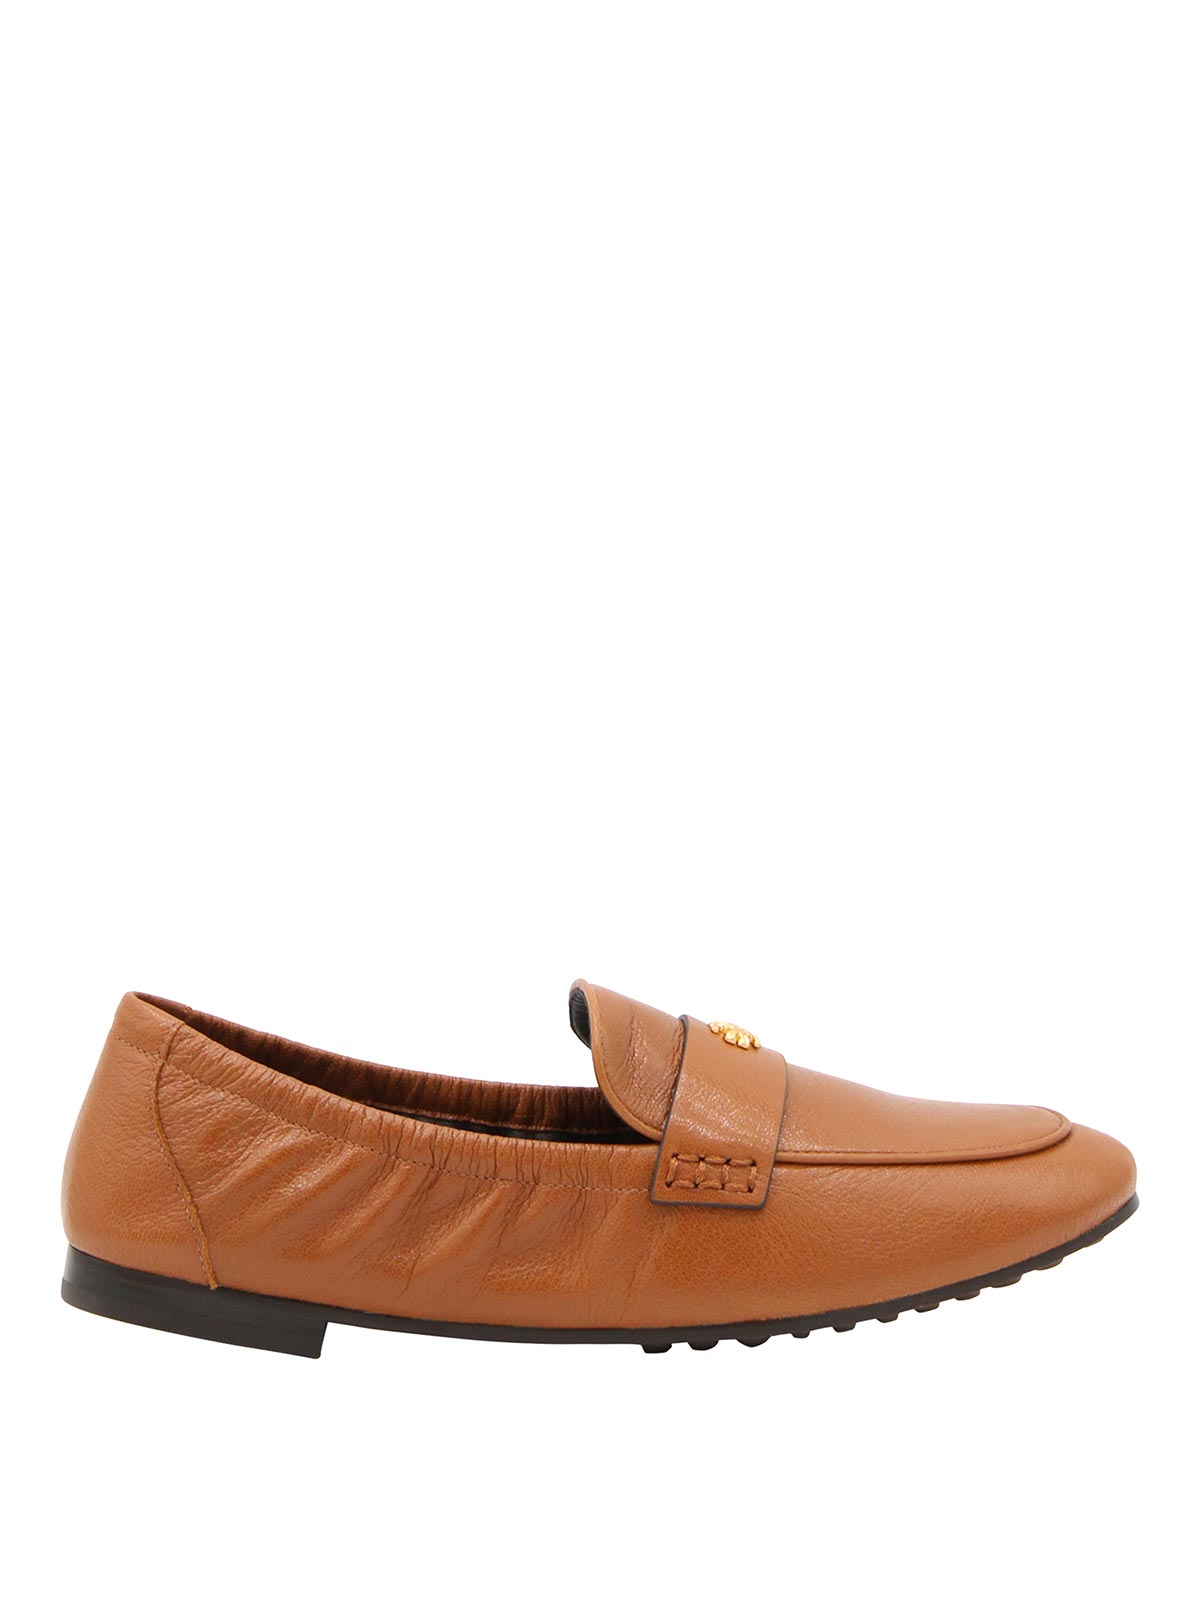 Tory Burch Camel Brown Leather Double T Loafers